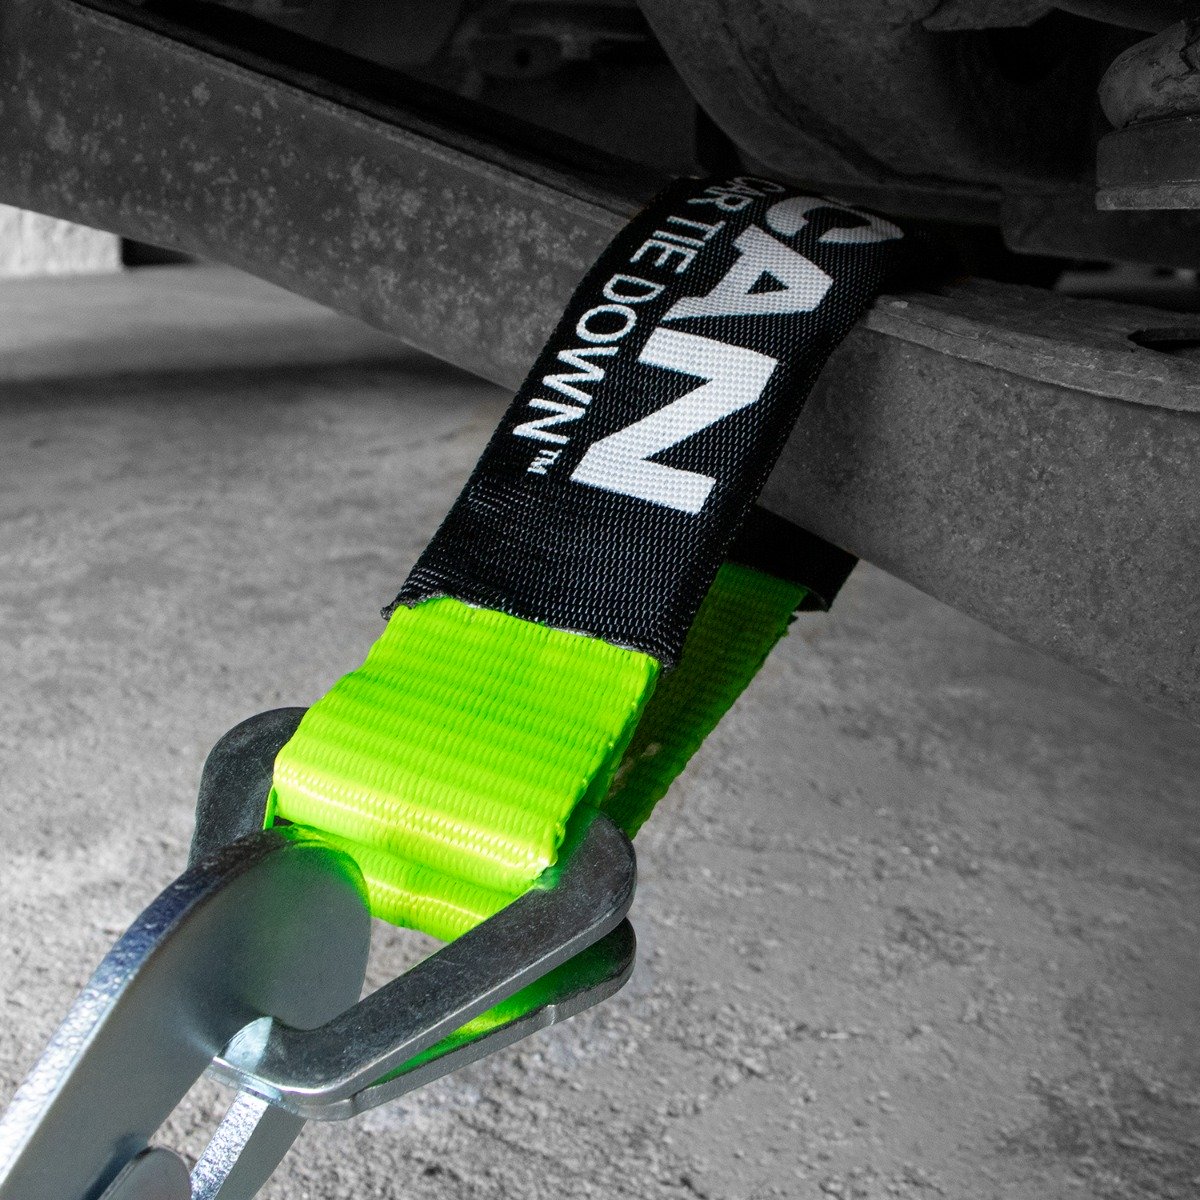 VULCAN Complete Axle Strap Tie Down Kit with Snap Hook Ratchet Straps  High-Viz Includes (4) 22 Inch Axle Straps, (4) 36 Inch Axle Straps, and  (4) 8' Snap Hook Ratchet Straps